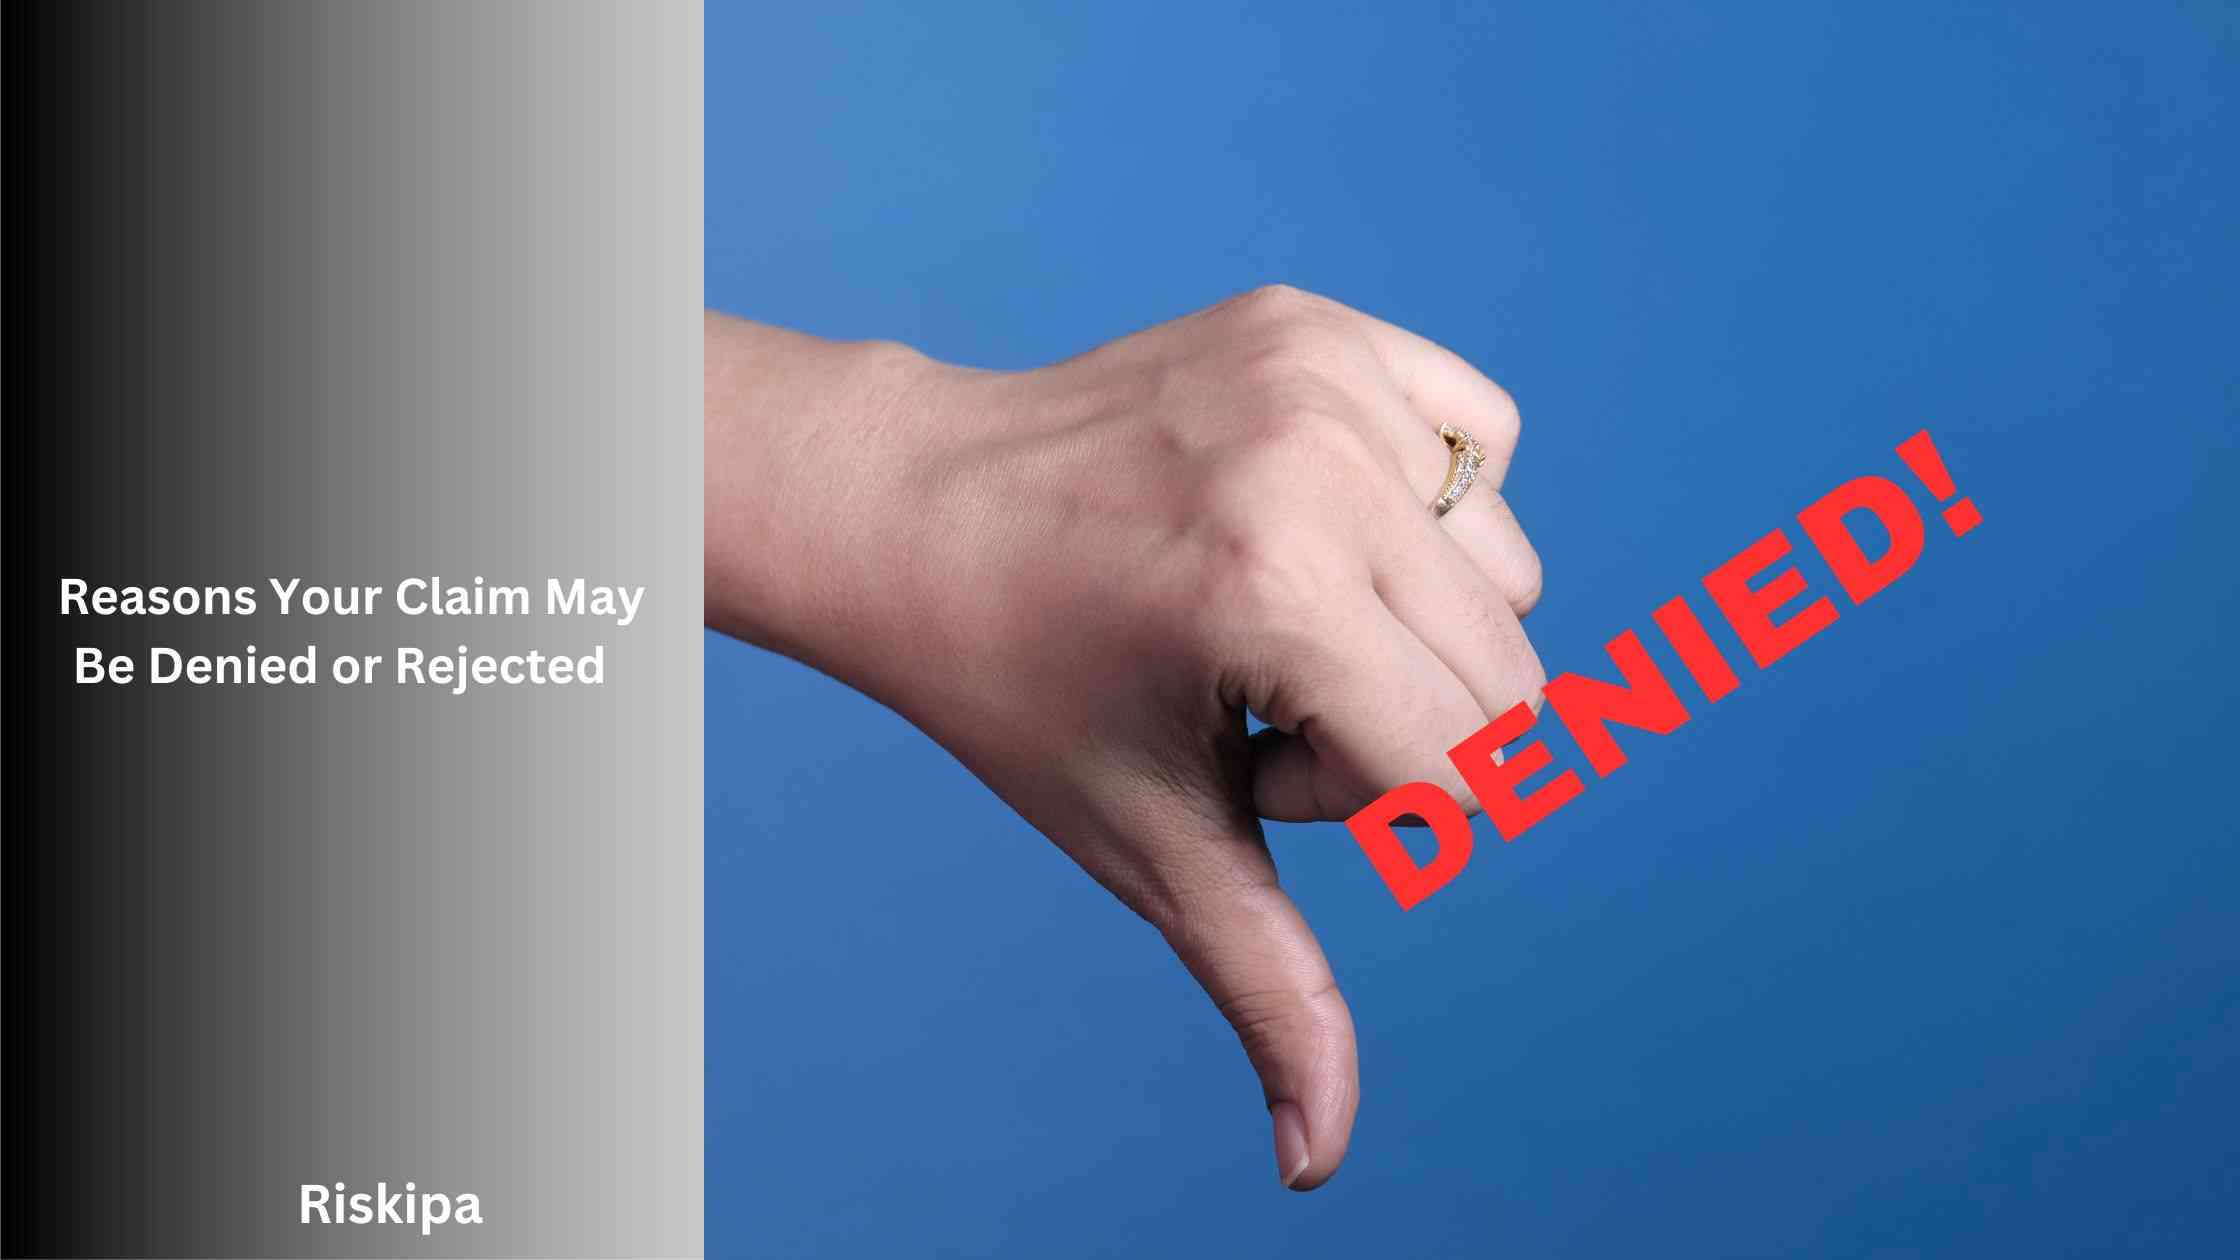 Most Common Reasons Why Your Claim May Be Denied or Rejected